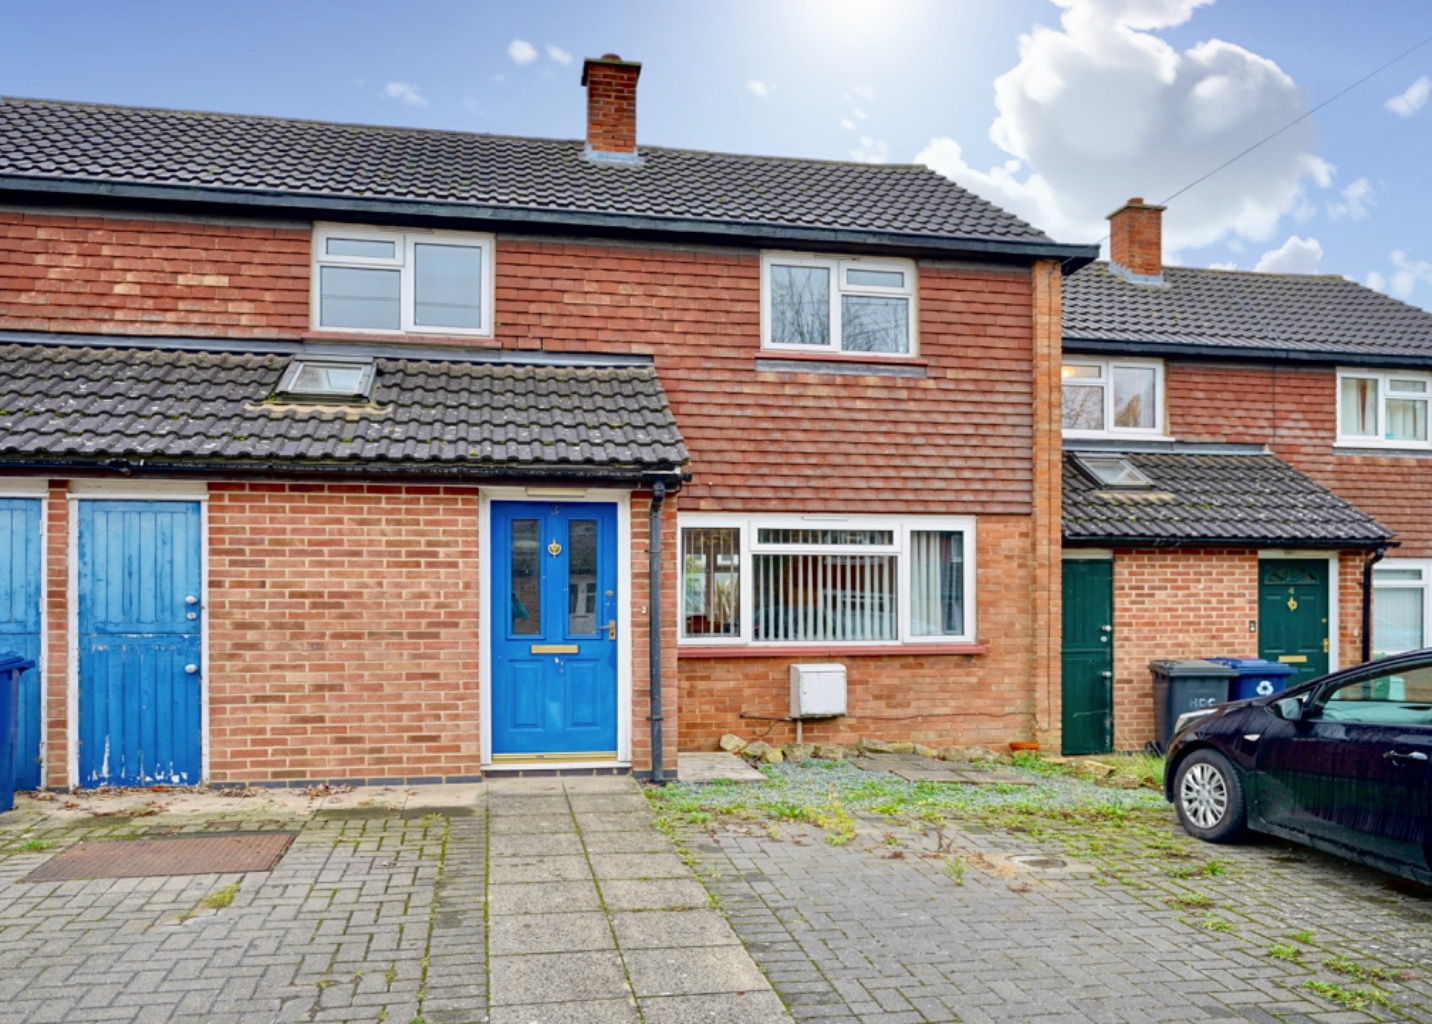 3 bed terraced house for sale in Dorset Close, Huntingdon 0